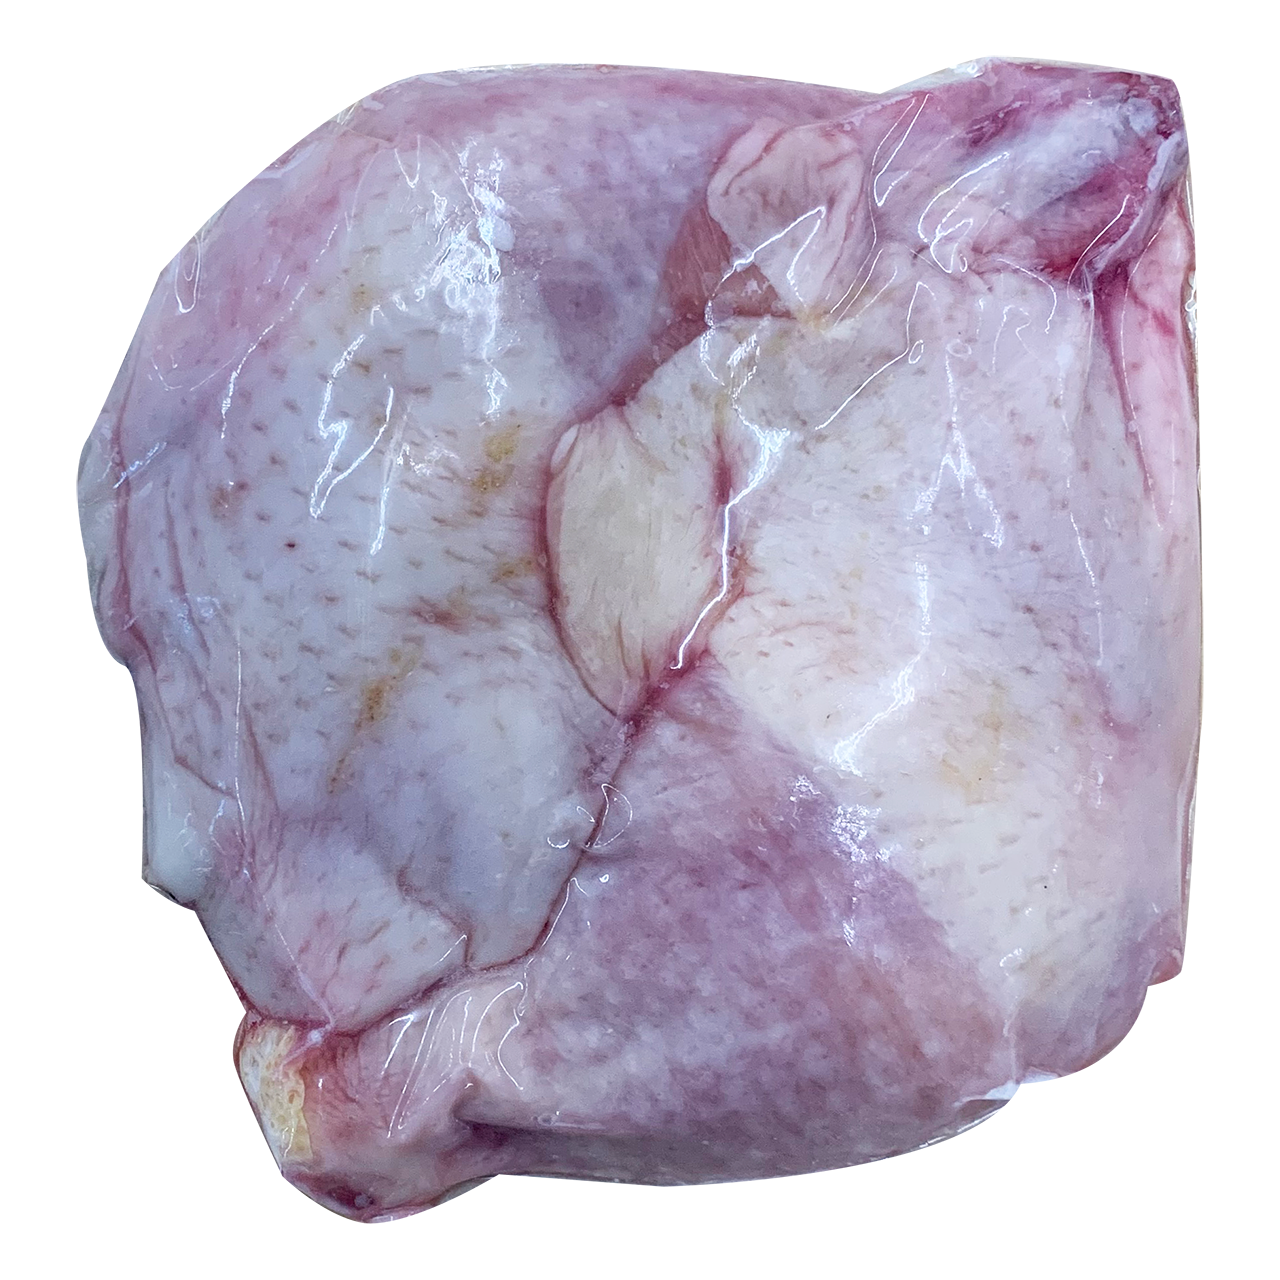 Chicken legs from Waseda Farms.